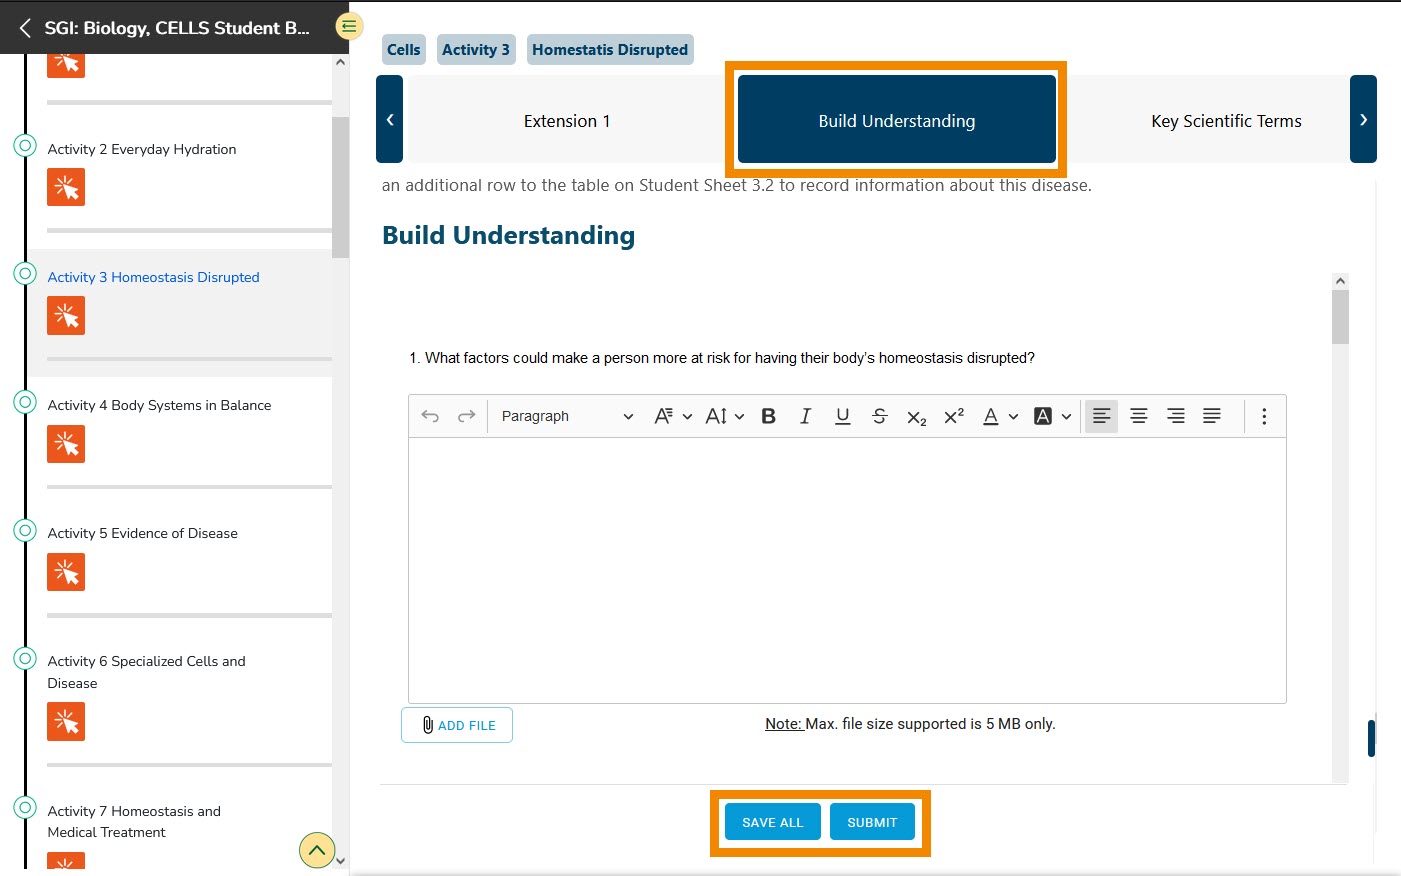 Navigate to the "Build Understanding" header. Enter your responses for each question and click "save all" or "submit".